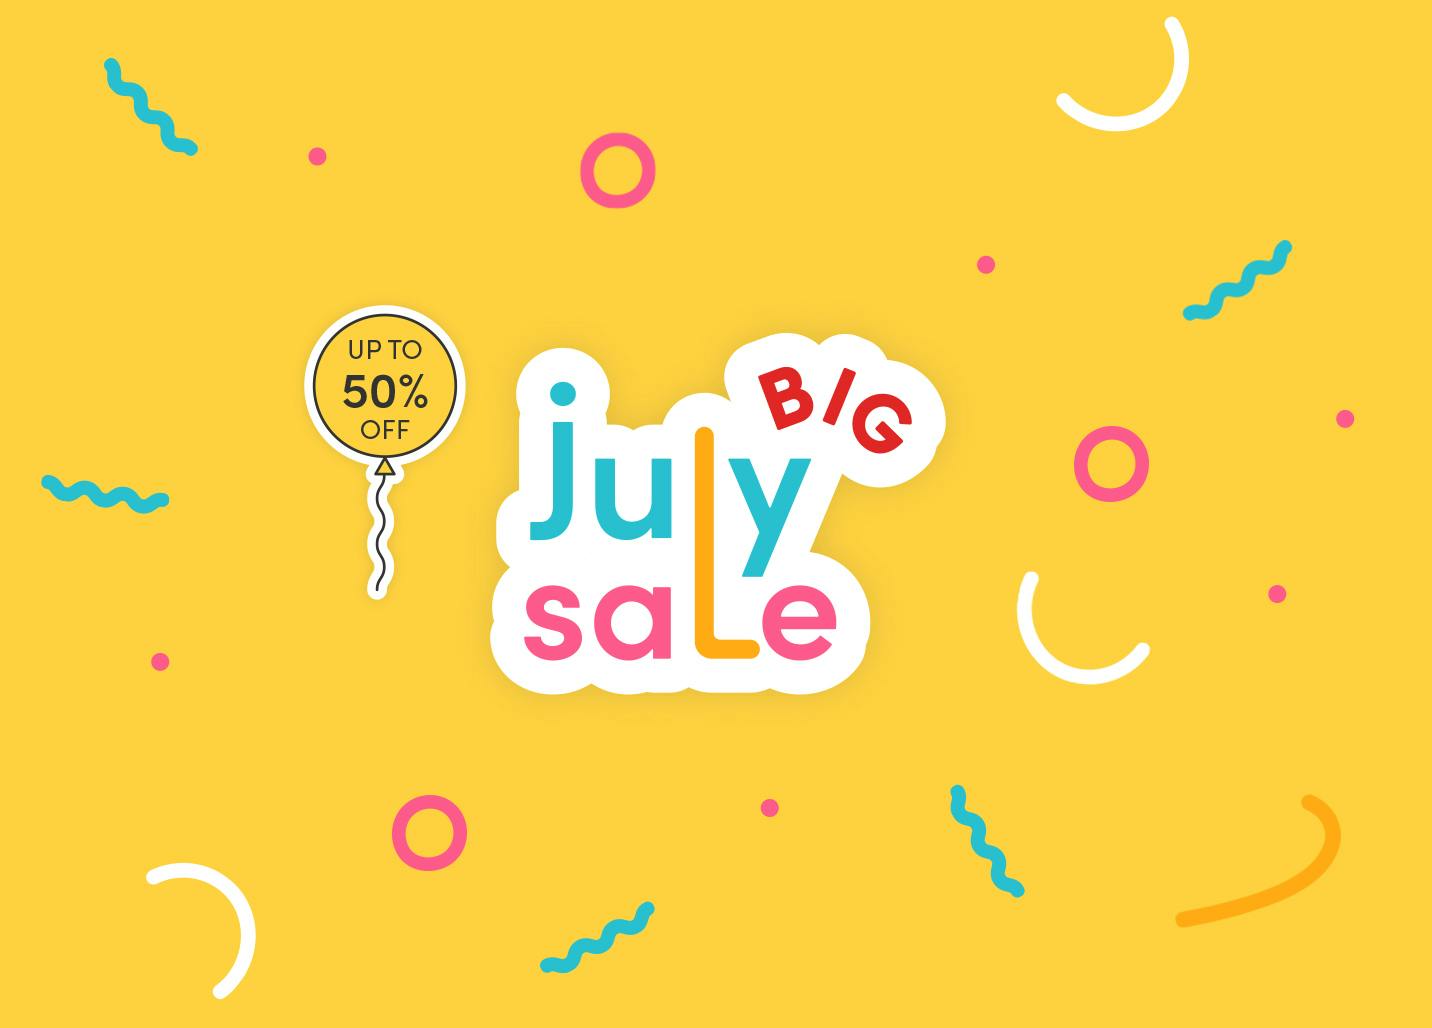 Up to 50% off in our Big July Sale